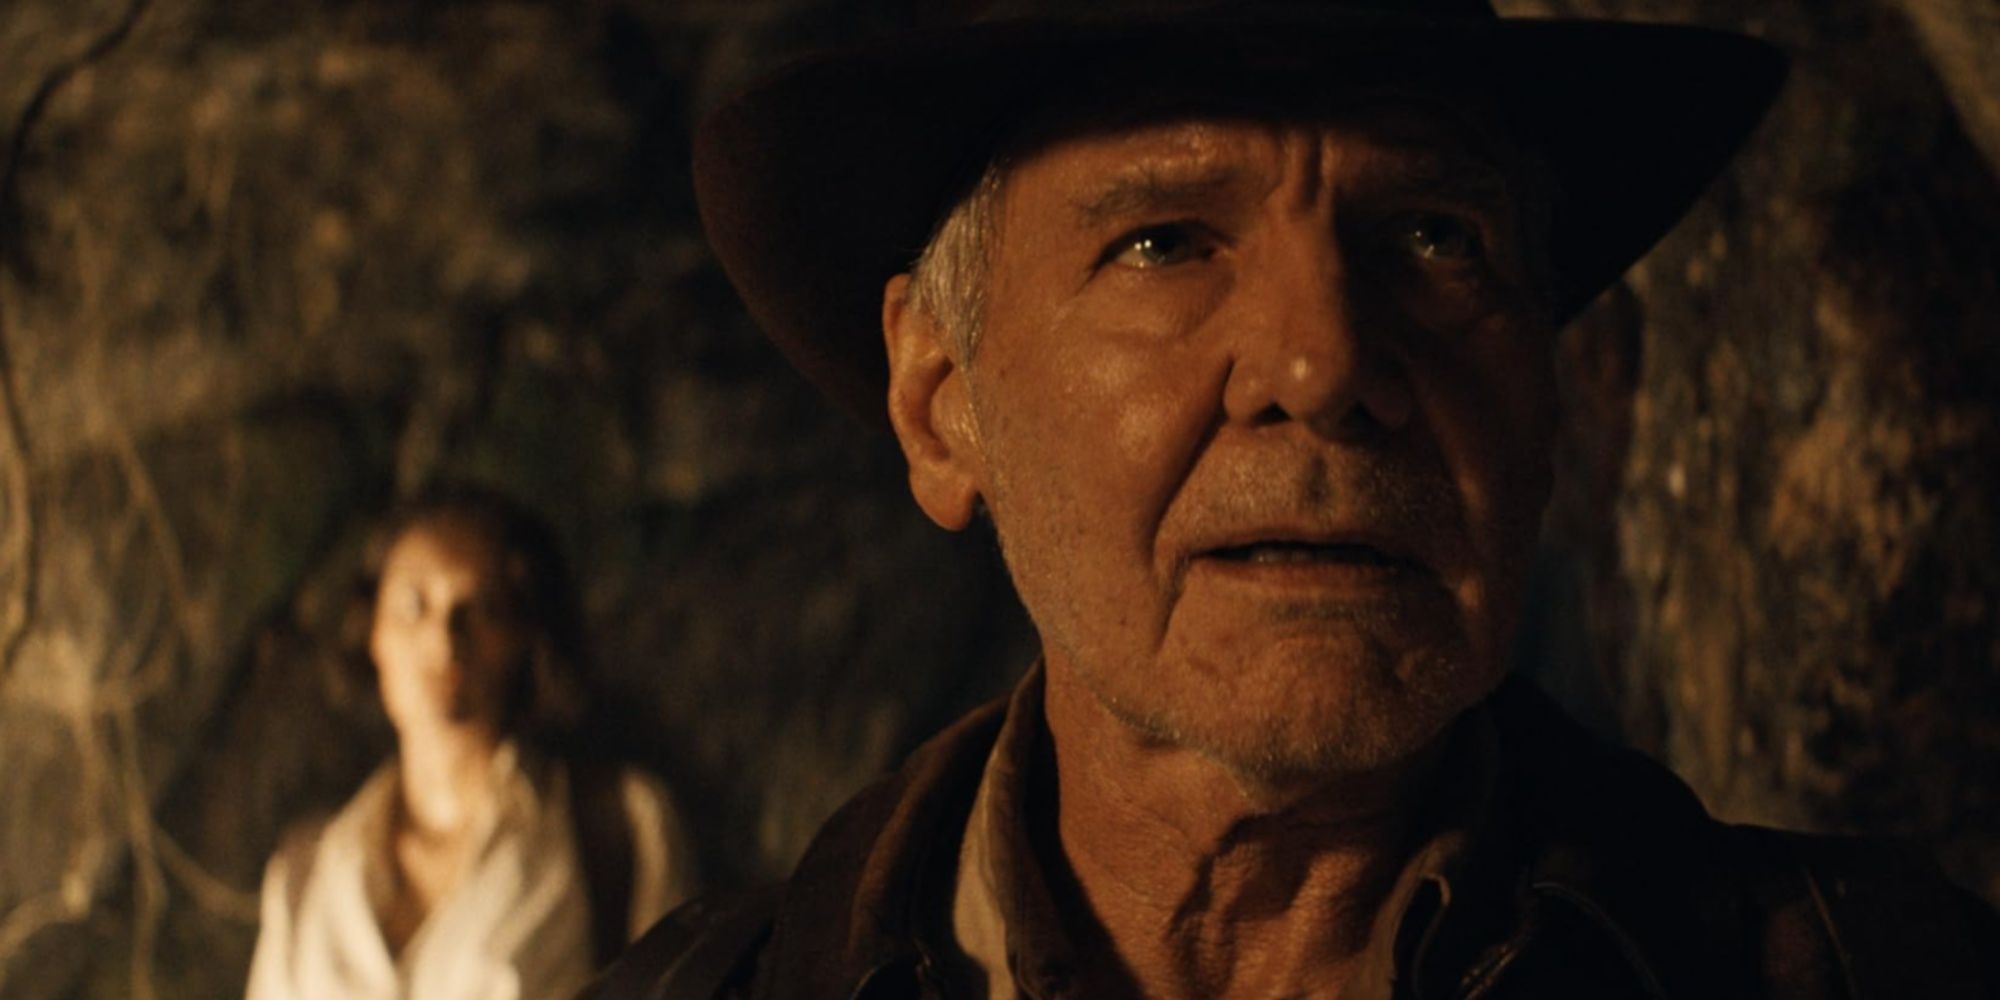 Indiana Jones looking straight ahead with an expression of relief as Helena is blurred out behind him in the distance.